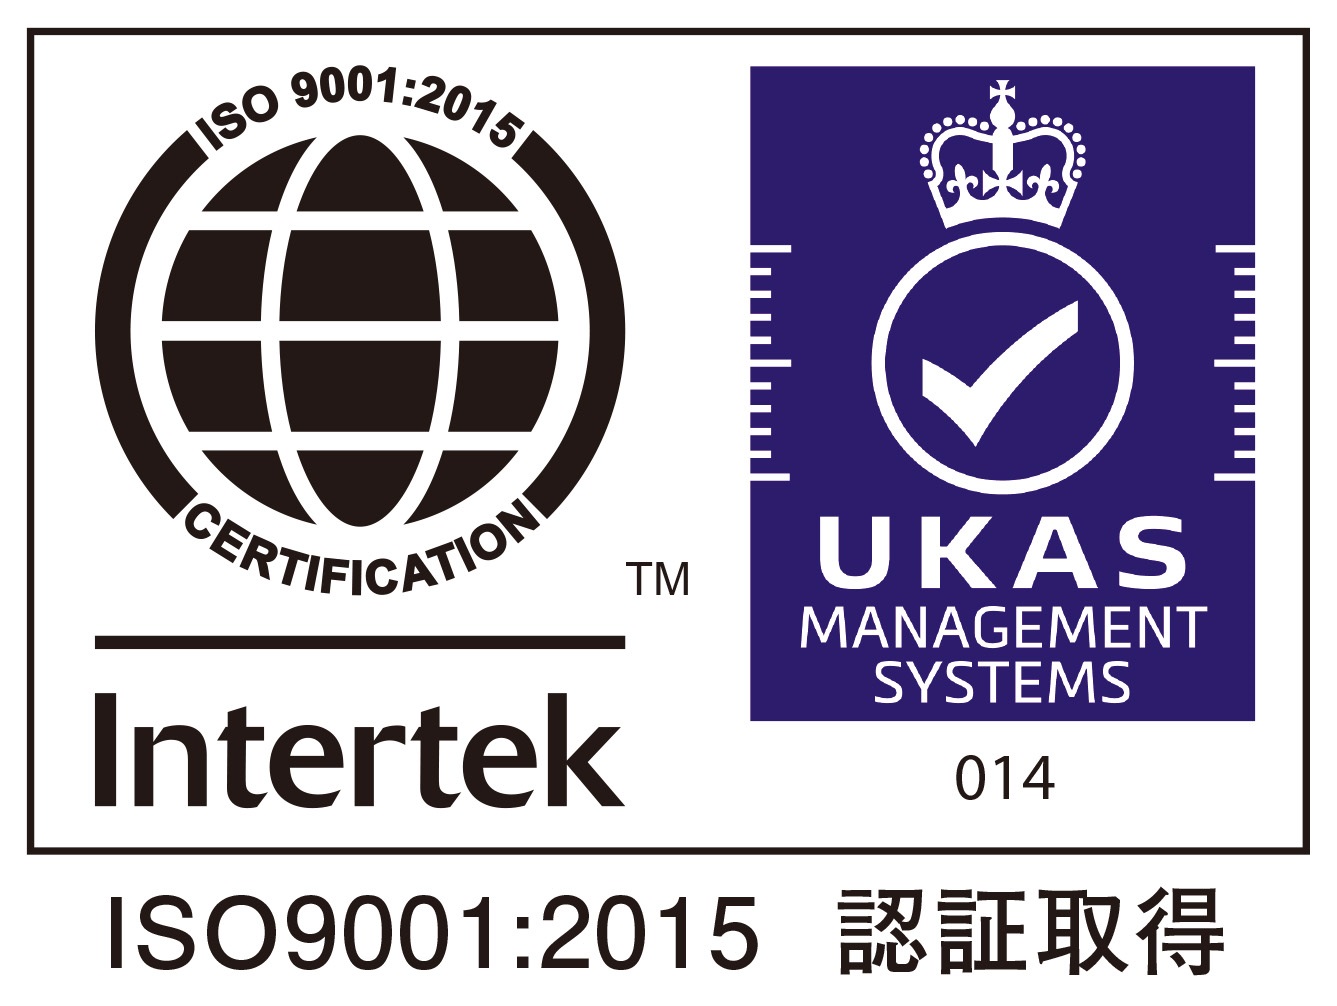 ISO9001 認証登録証明書